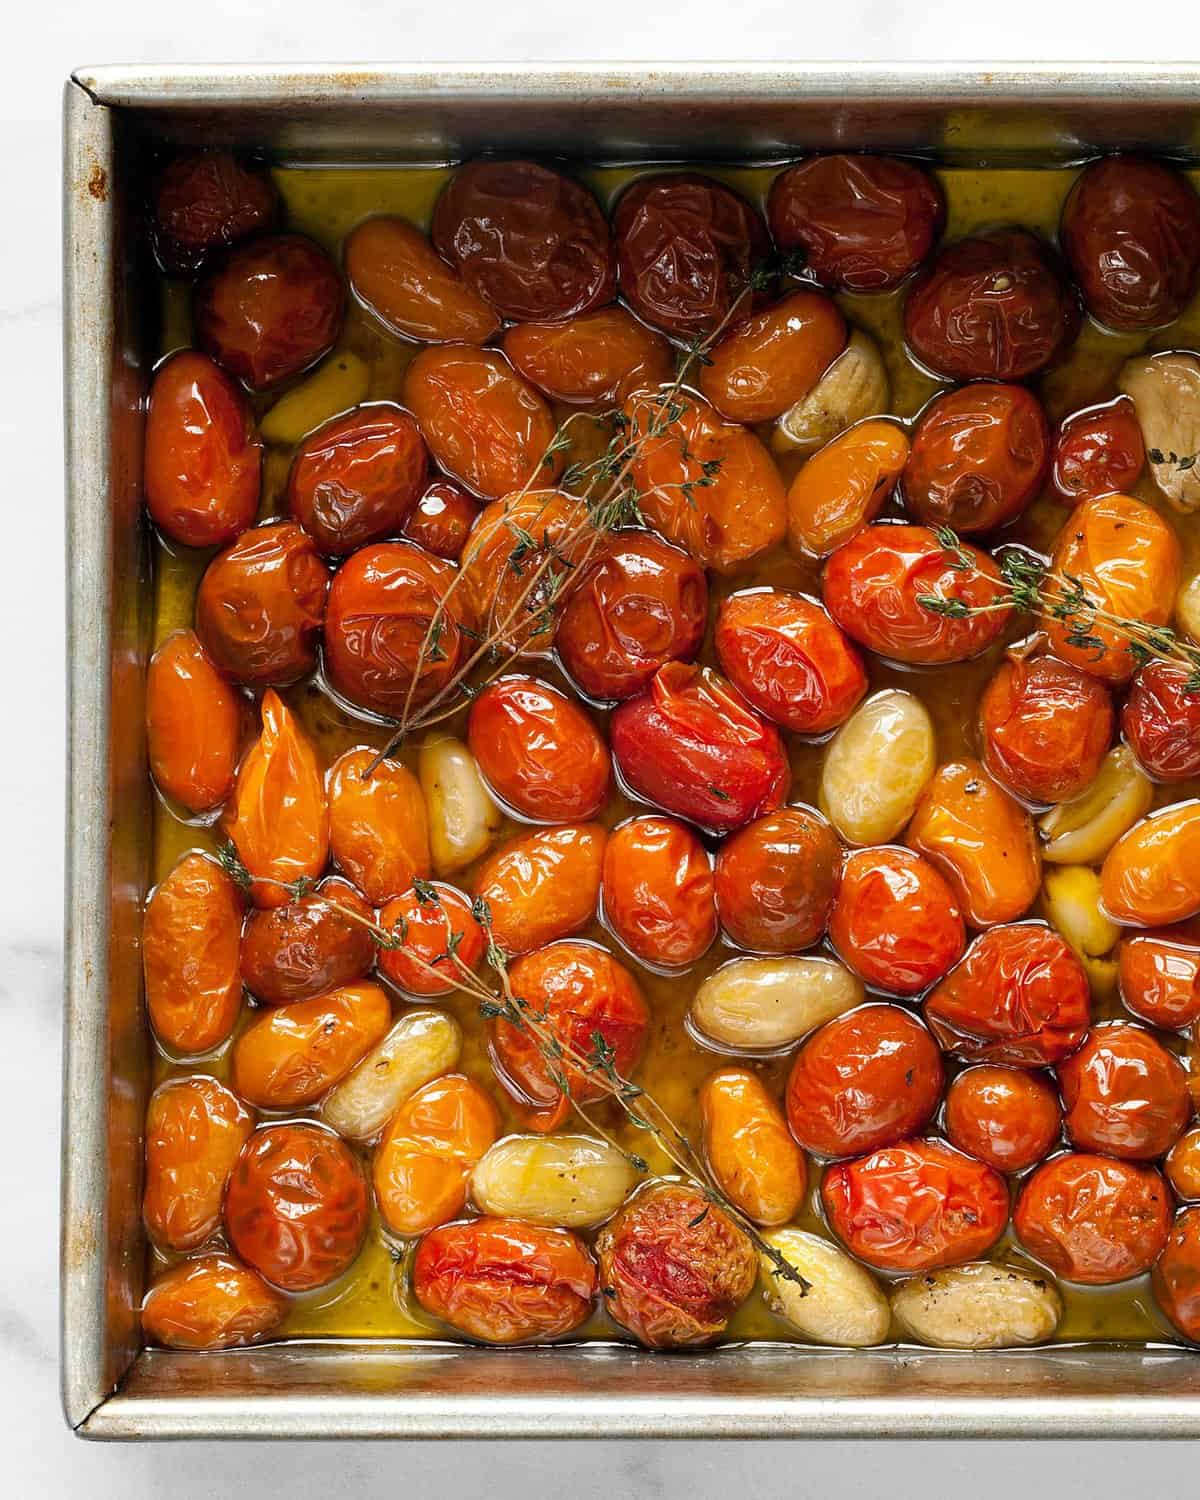 Confit tomatoes in a baking pan.